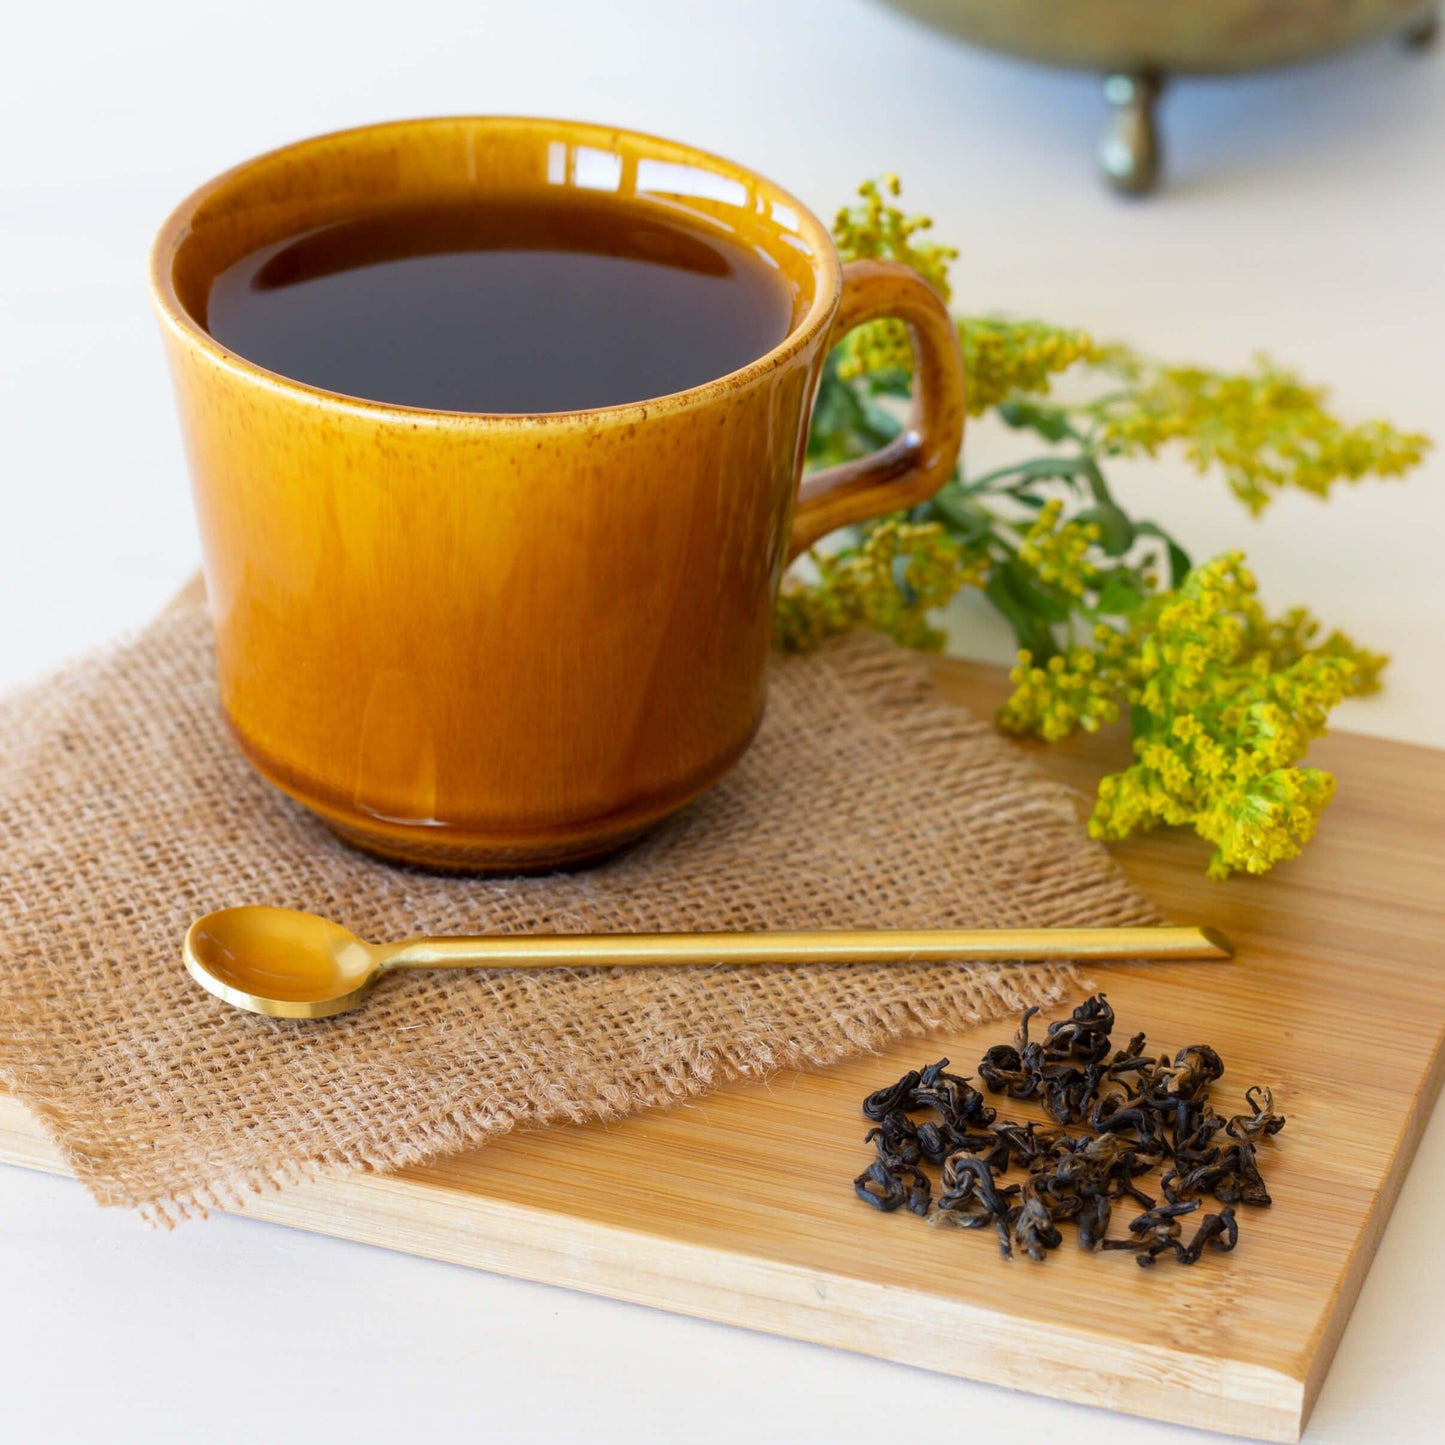 Nepalese Gold Black Tea shown brewed in a btown pottery mug, displayed on a piece of burlap on a bamboo coaster with a thin gold spoon, leaves of tea, and a yellow sprig of flowers